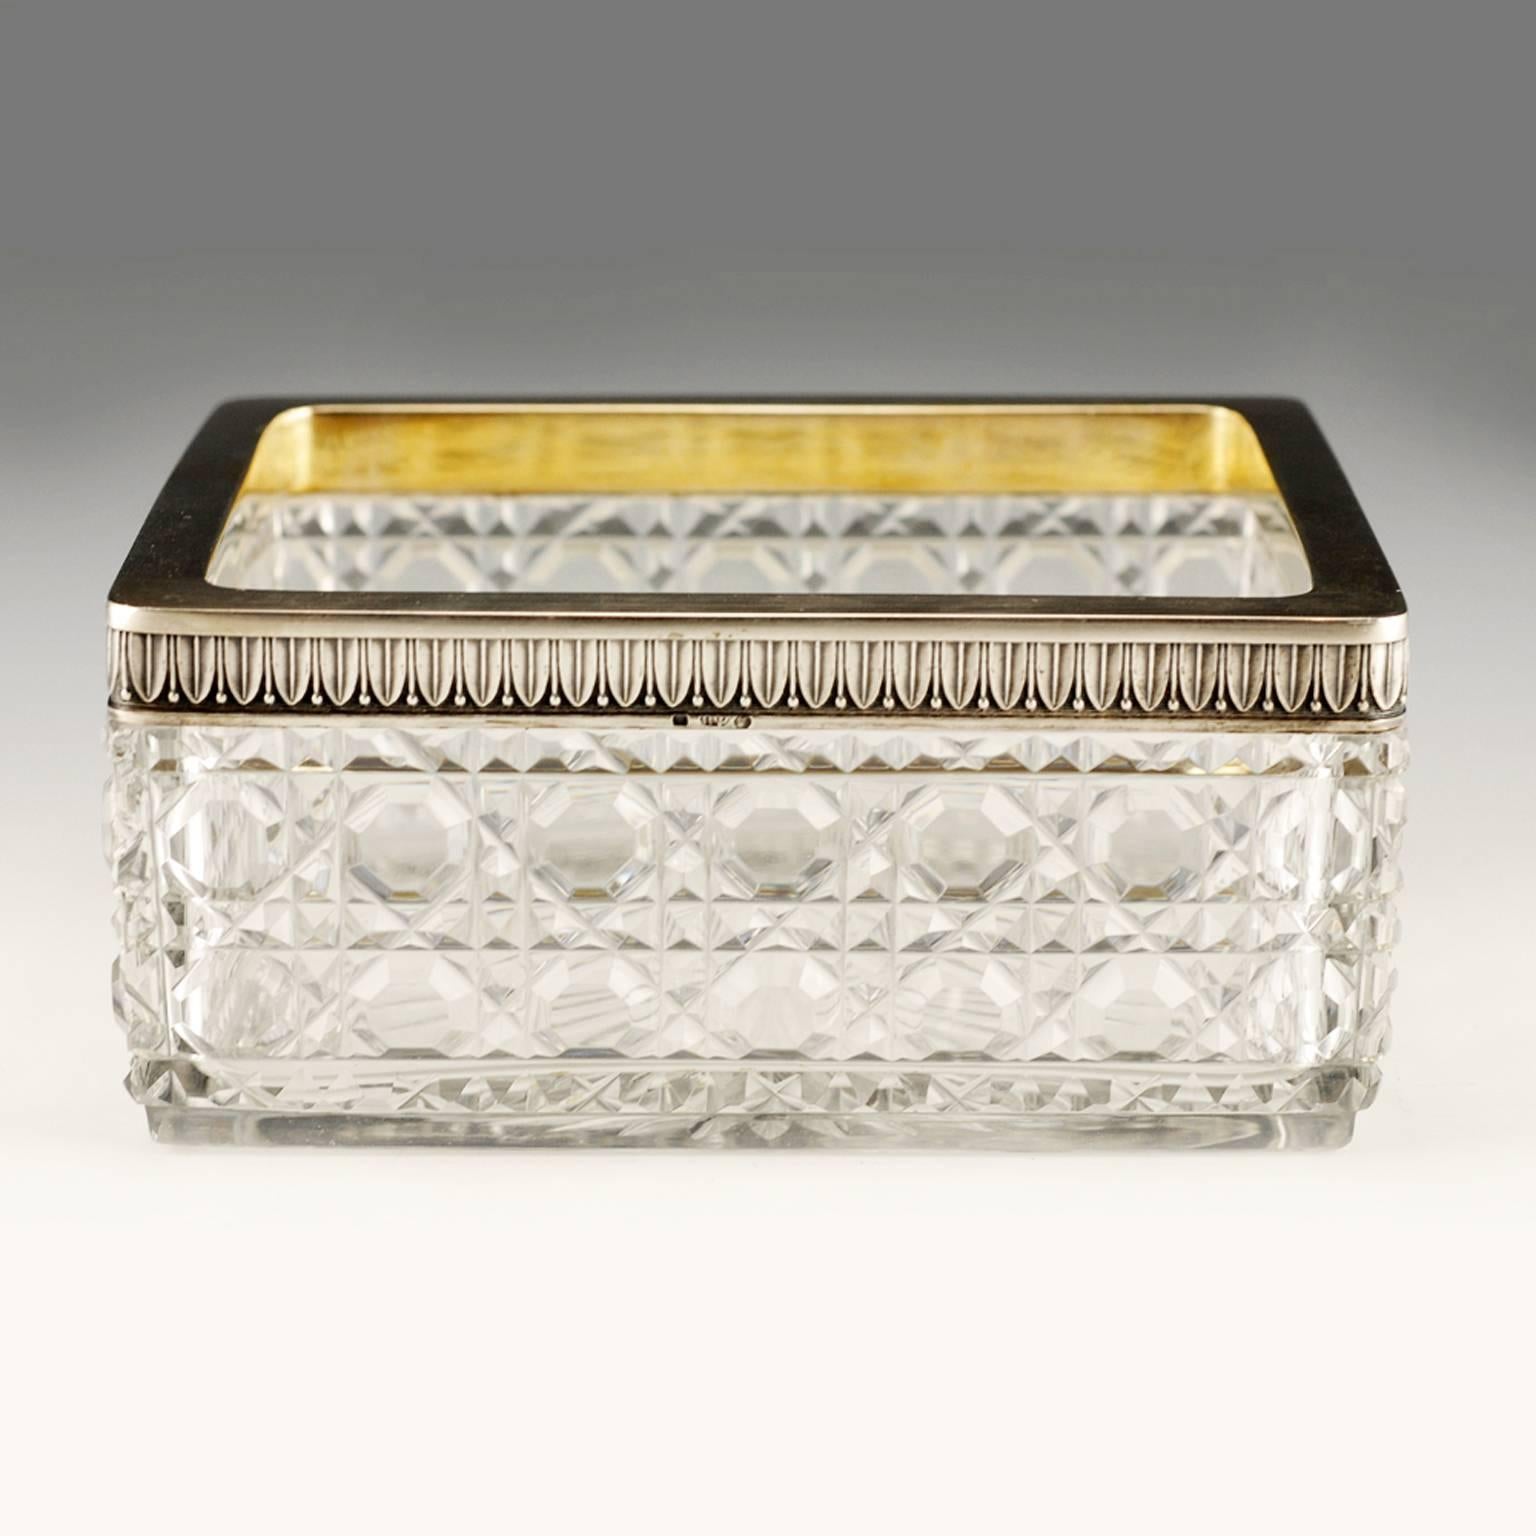 A Russian silver-mounted rectangular cut lead glass serving dish, Petr Fariseev, Moscow, circa 1908-1917. In Neoclassical taste, the rectangular glass dish, almost cetainly from the Bakhmetev Glassworks, cut in a combination hobnail-cane pattern,